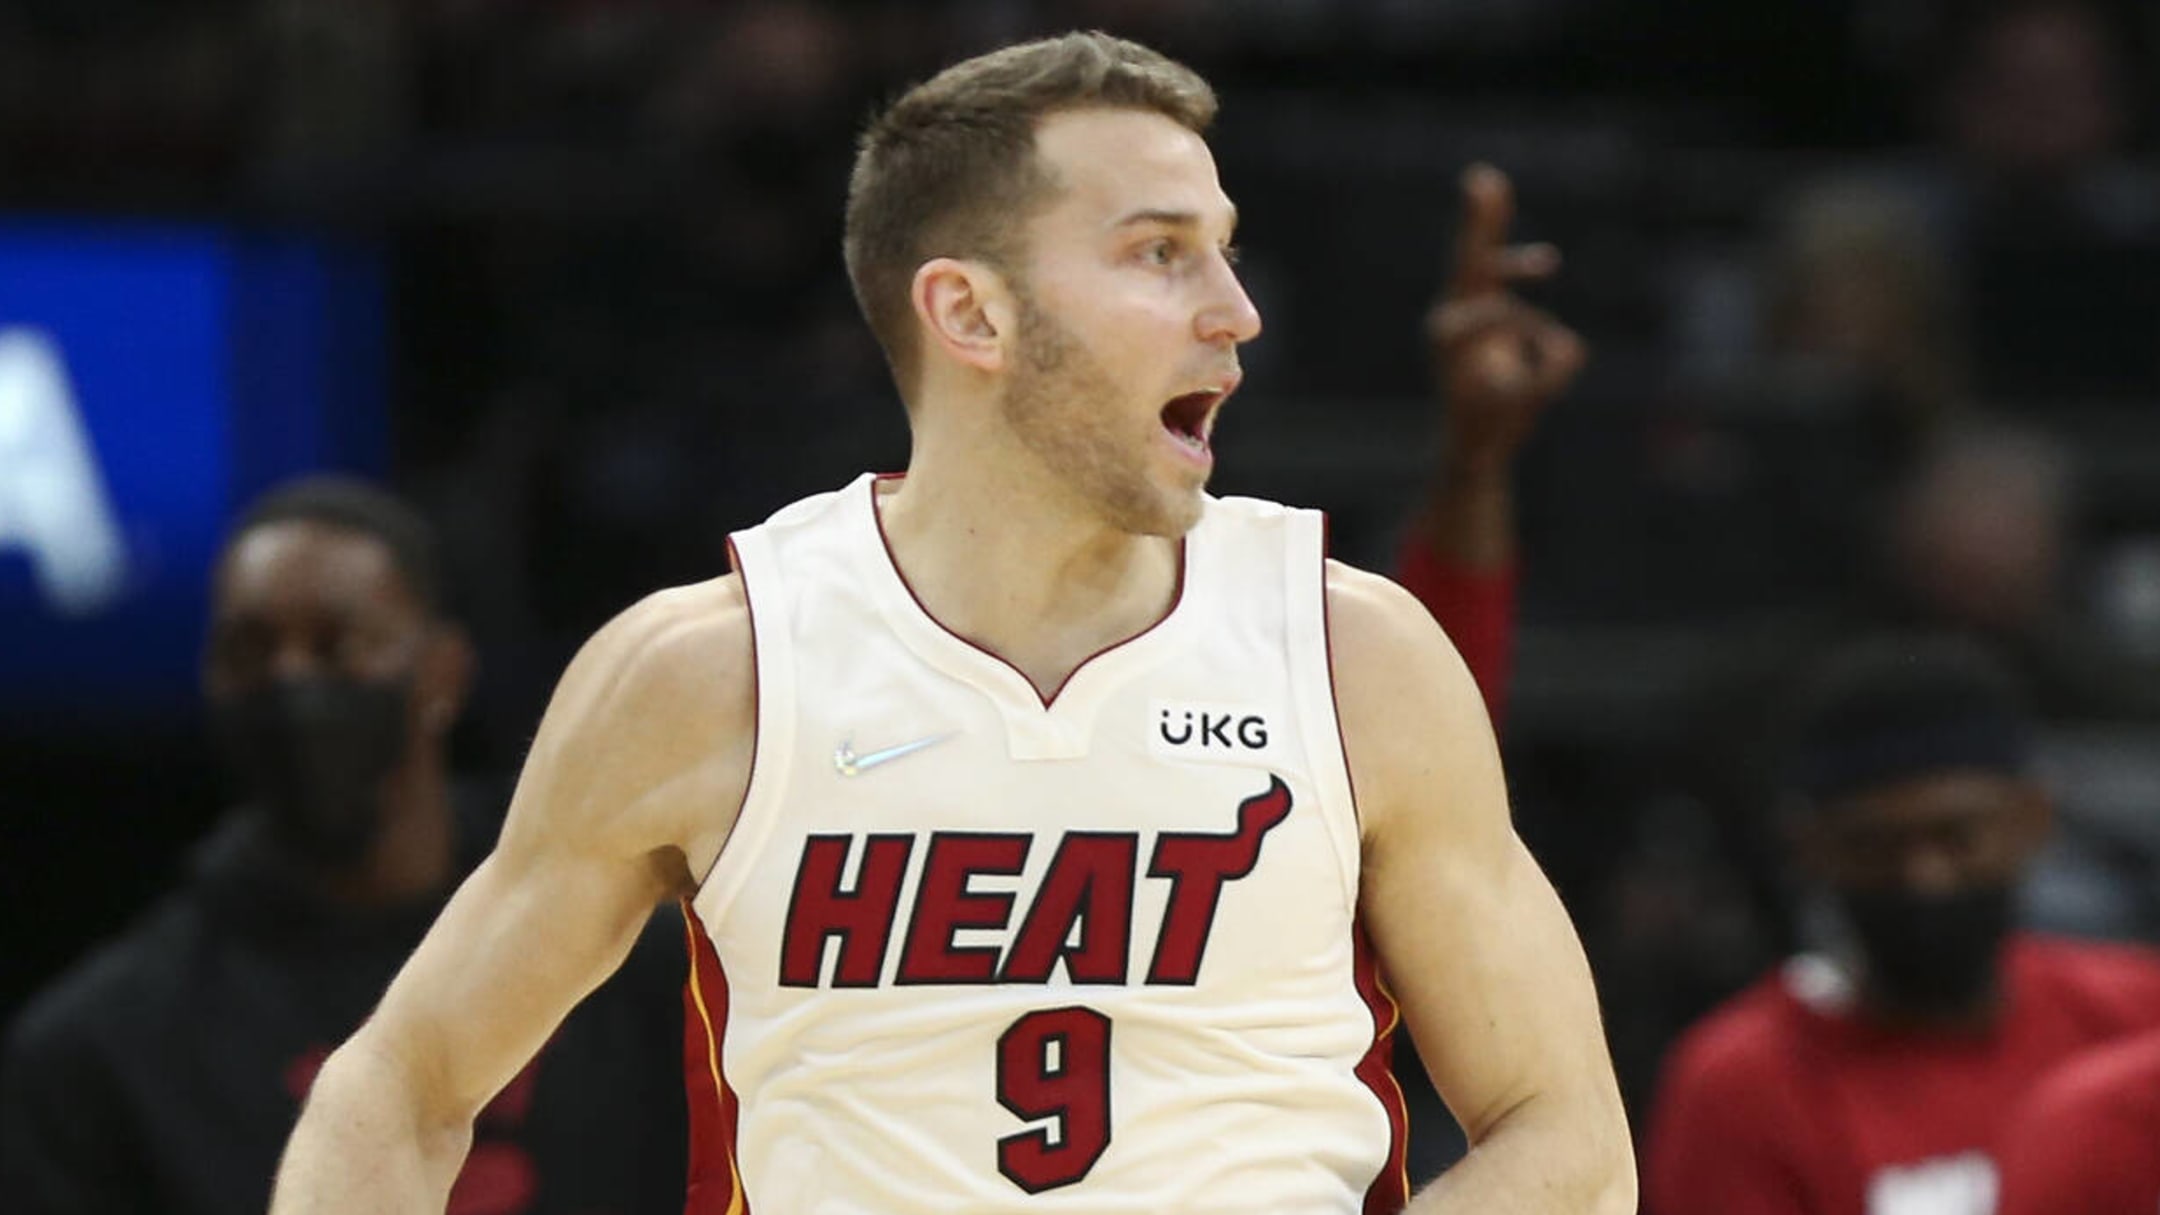 Nik Stauskas, Celtics Agree To Two-Year Contract - Hoops Wire